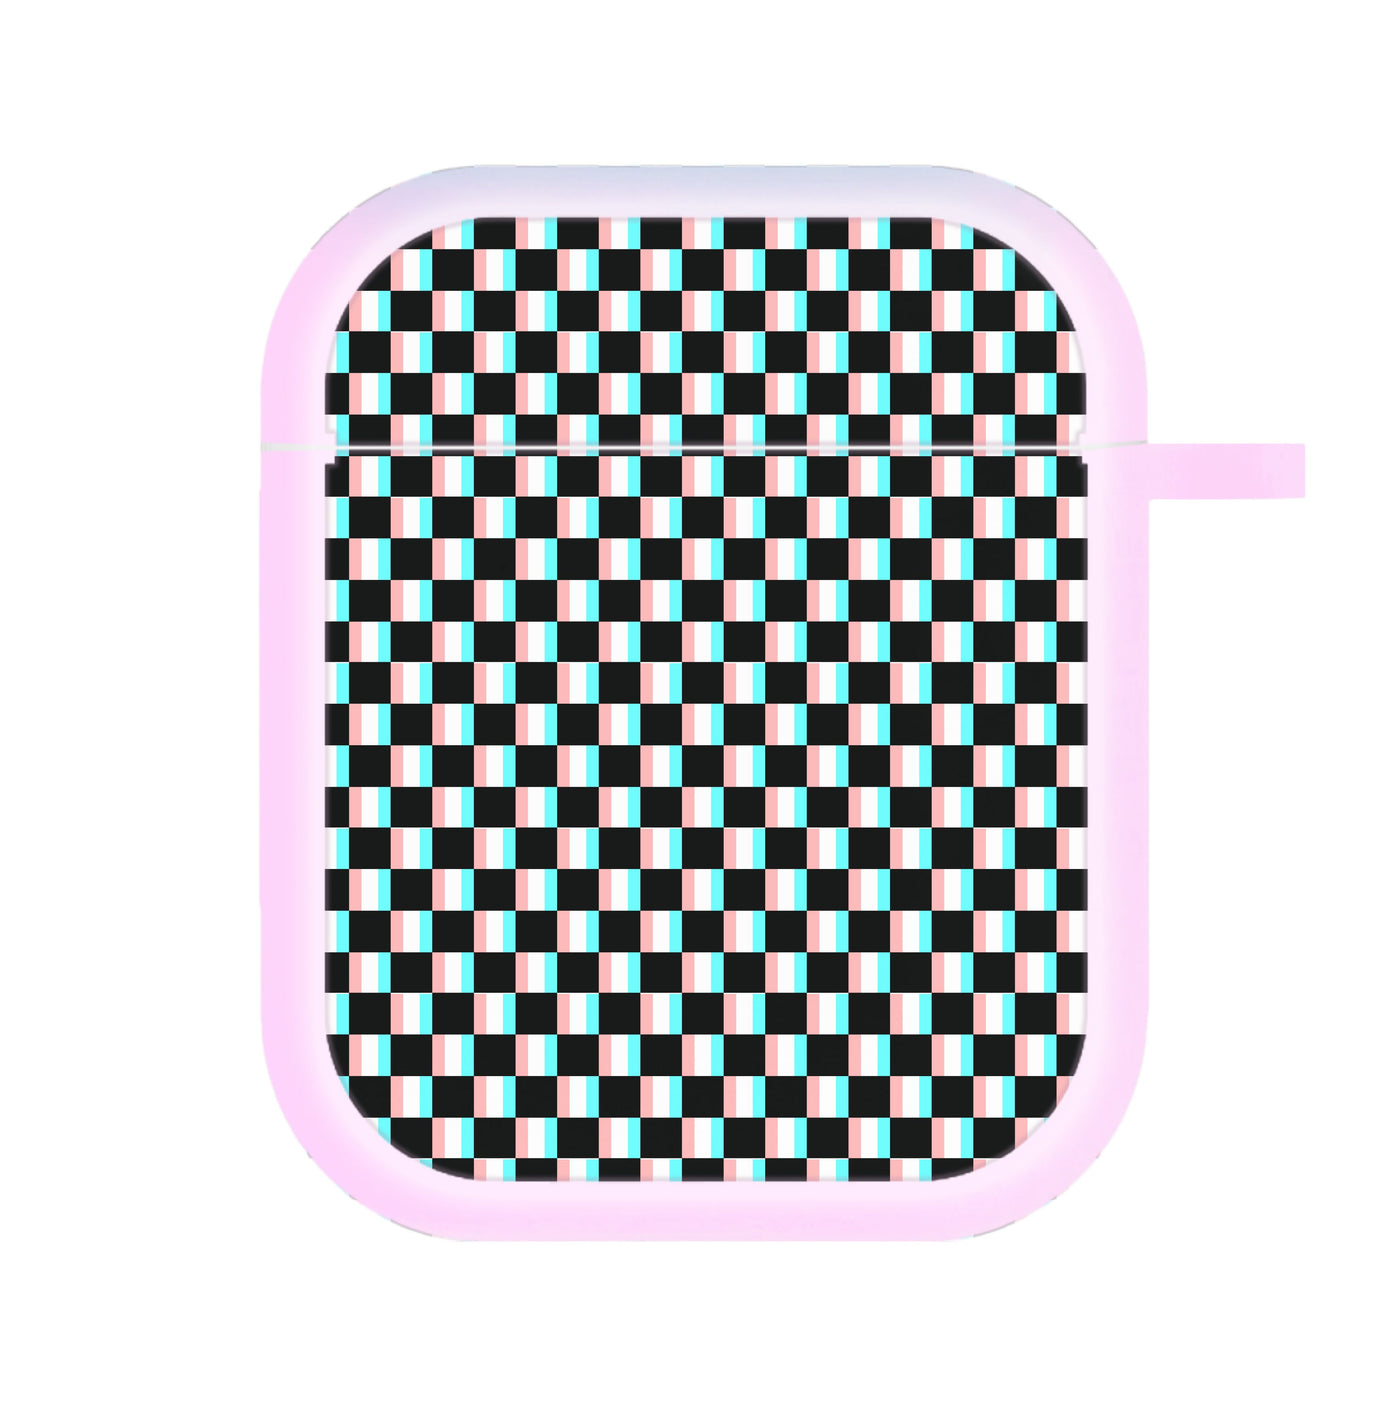 3D Squares - Trippy Patterns AirPods Case